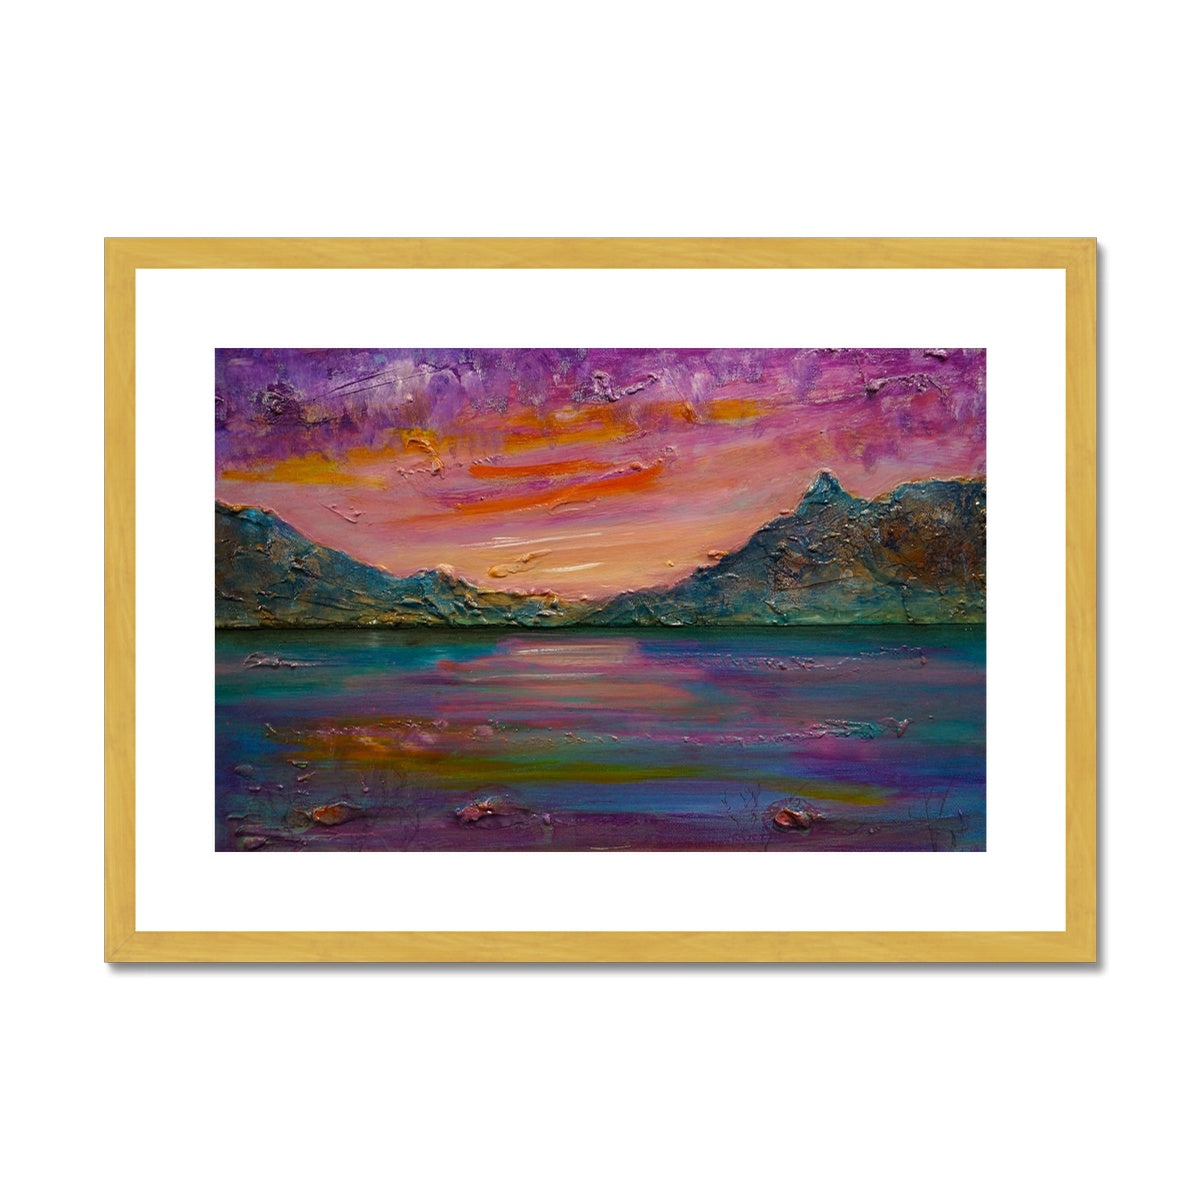 Loch Leven Sunset Painting | Antique Framed & Mounted Prints From Scotland-Antique Framed & Mounted Prints-Scottish Lochs & Mountains Art Gallery-A2 Landscape-Gold Frame-Paintings, Prints, Homeware, Art Gifts From Scotland By Scottish Artist Kevin Hunter